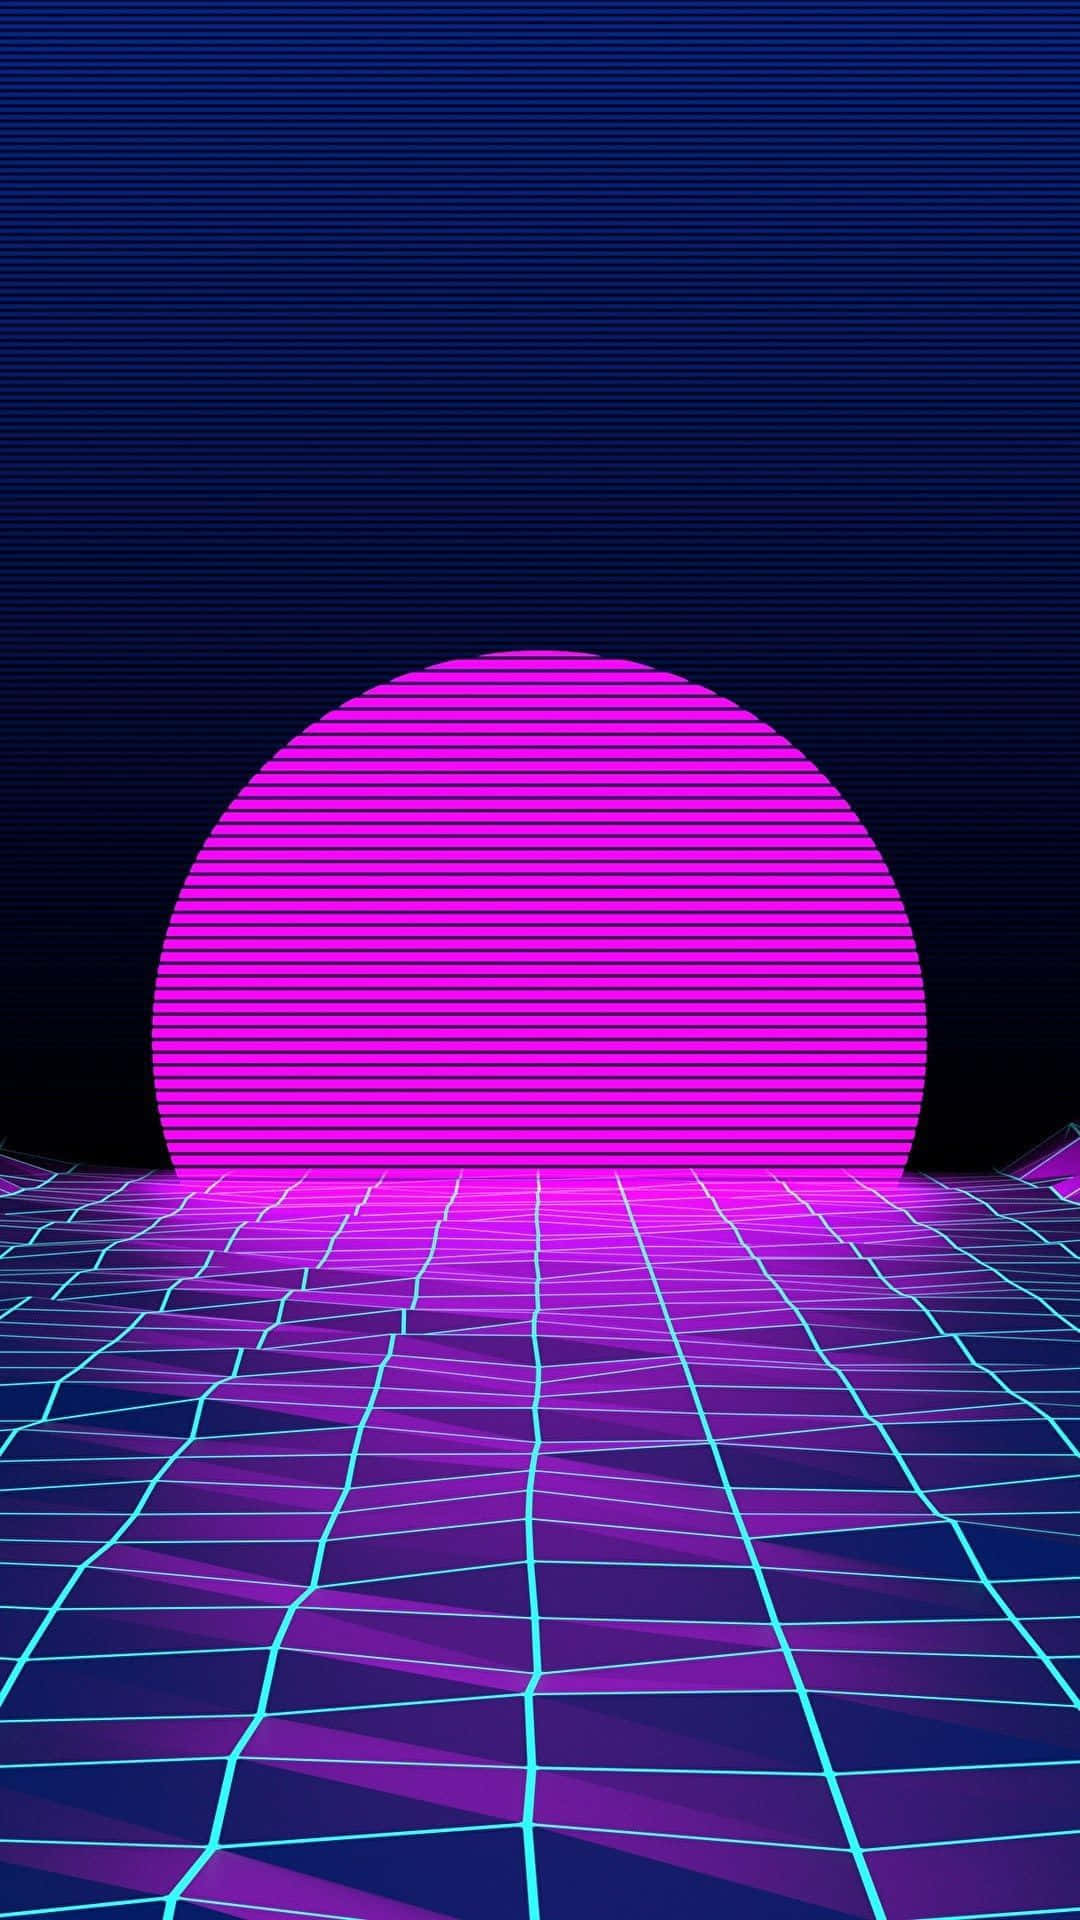 Colorful 80's style iPhone wallpaper. Wallpaper